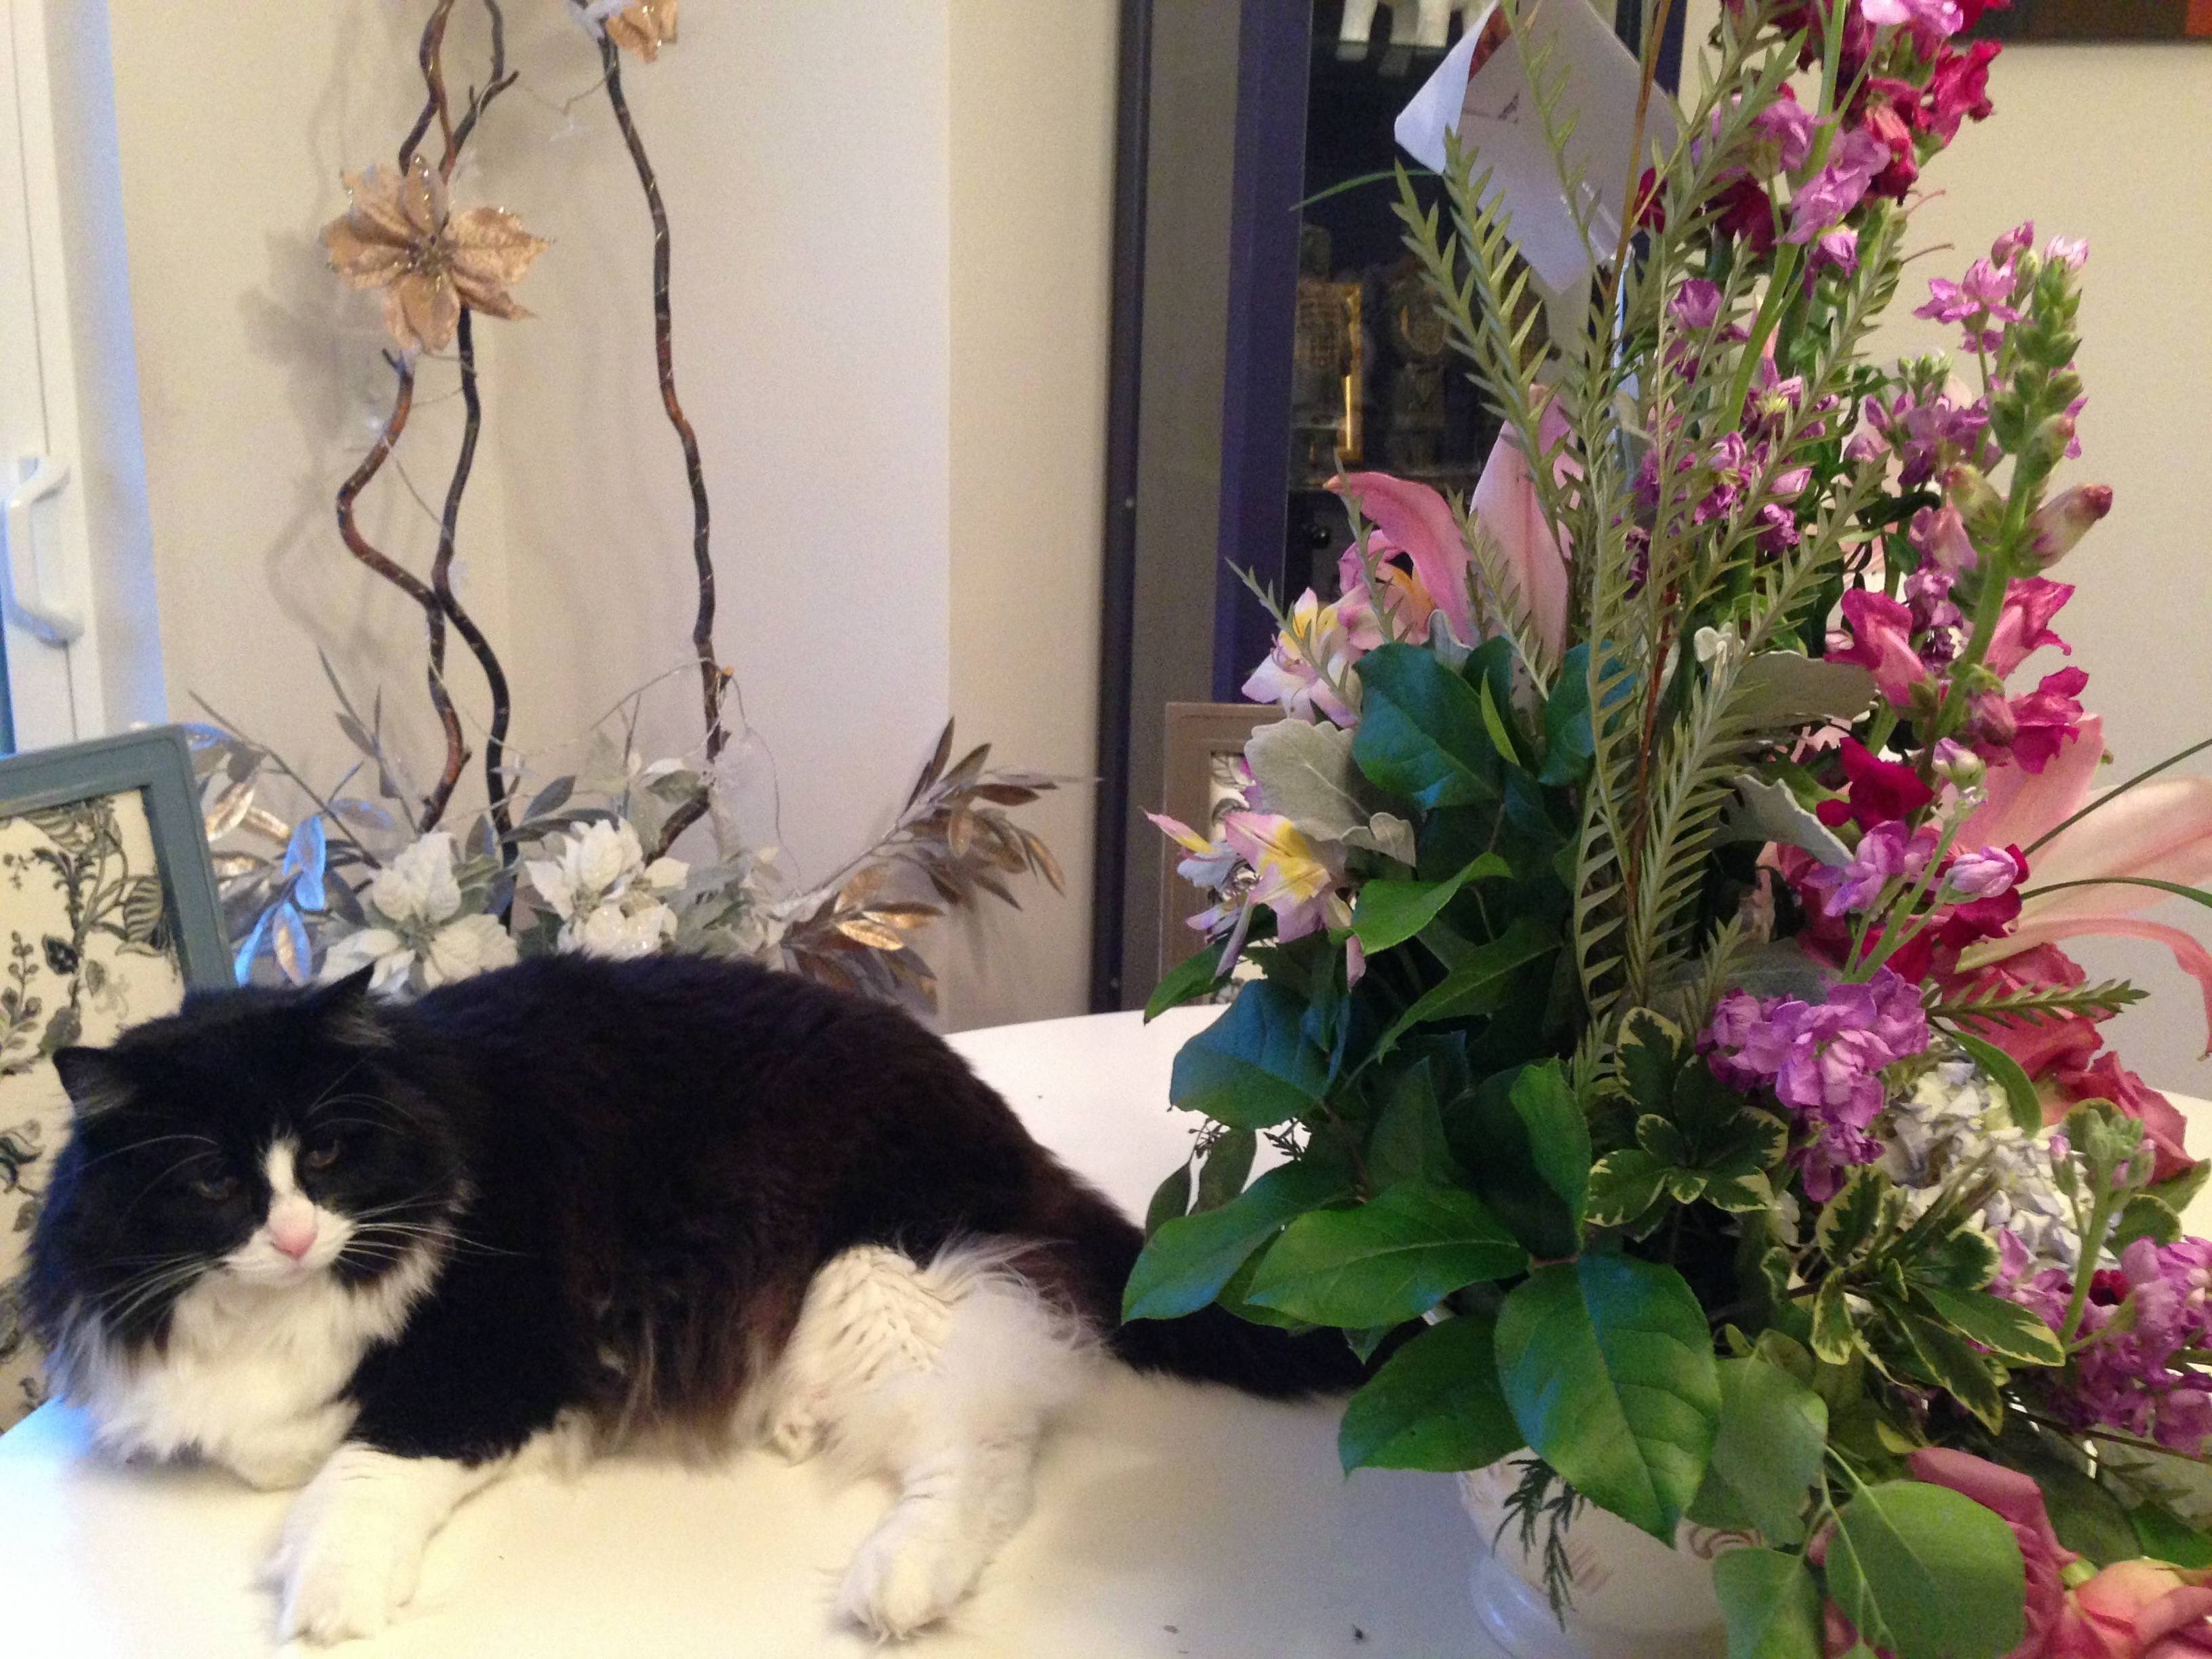 Hes sulking because i wouldnt let him eat the flowers